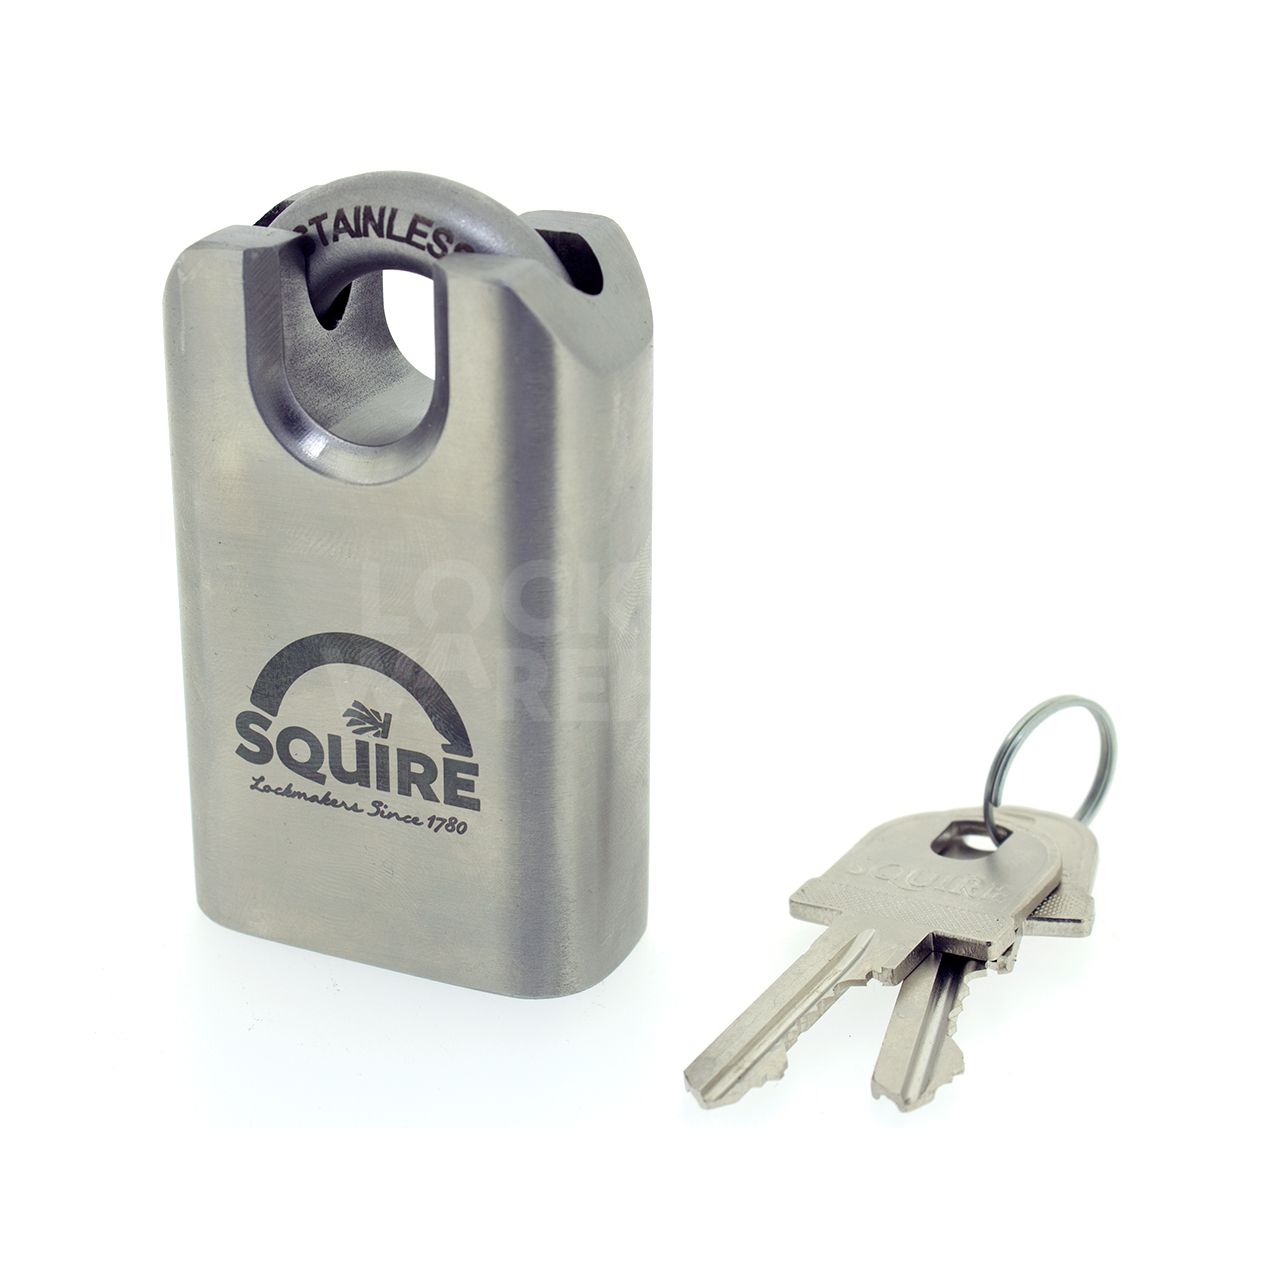 SQUIRE Stronghold® ST50CS - Closed Shackle - Stainless Steel Padlock